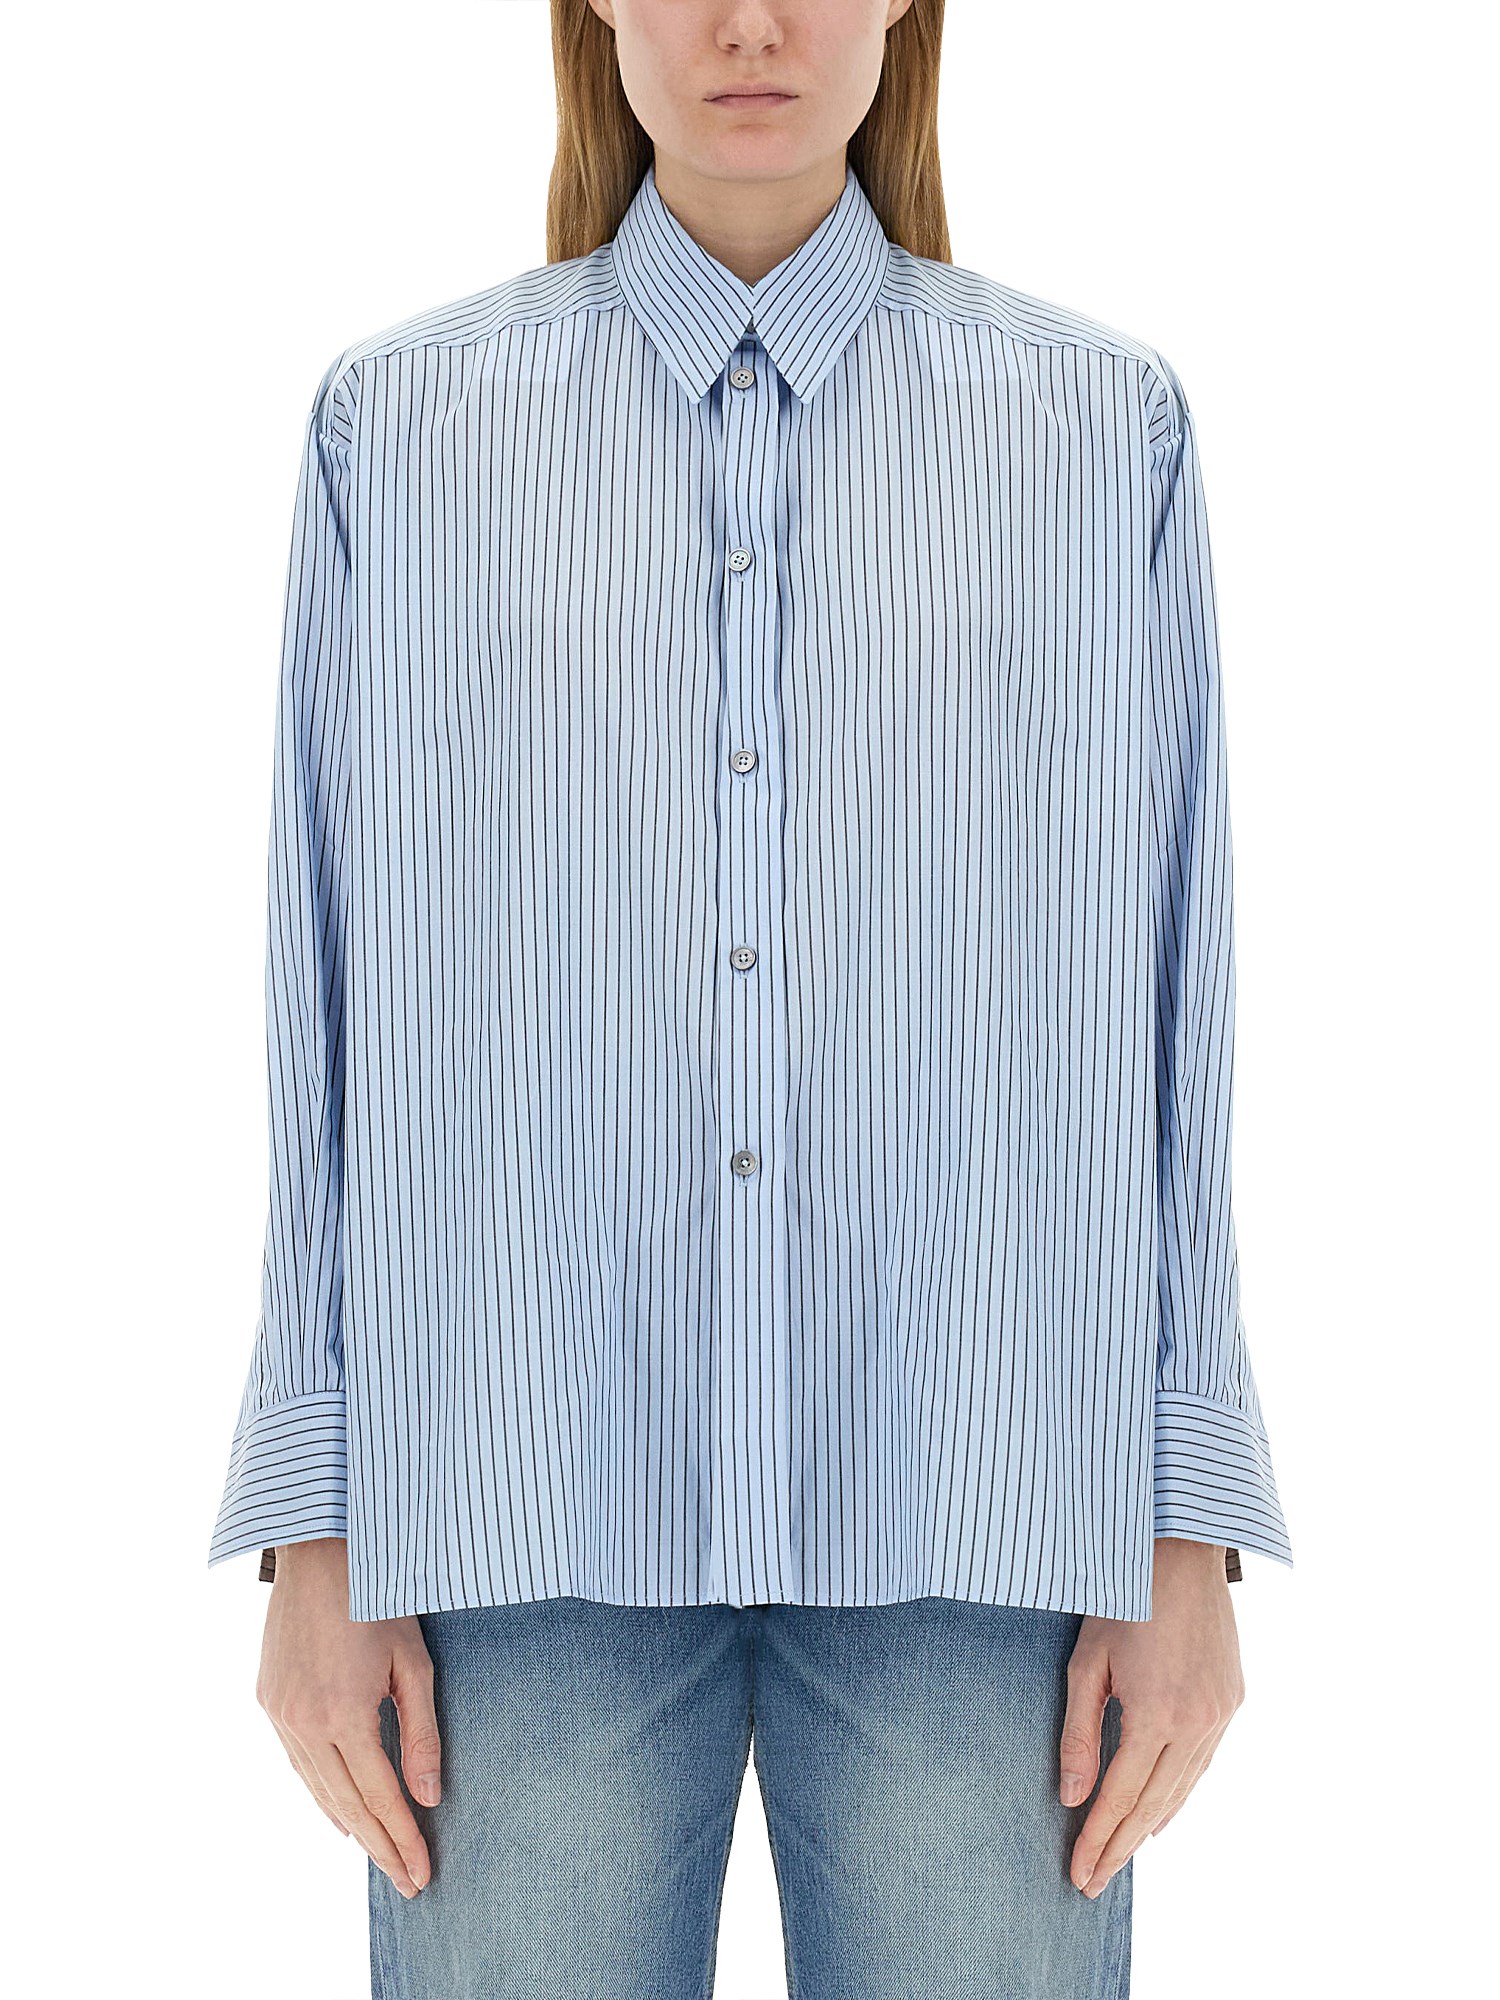 Paul Smith Striped Shirt In Blue